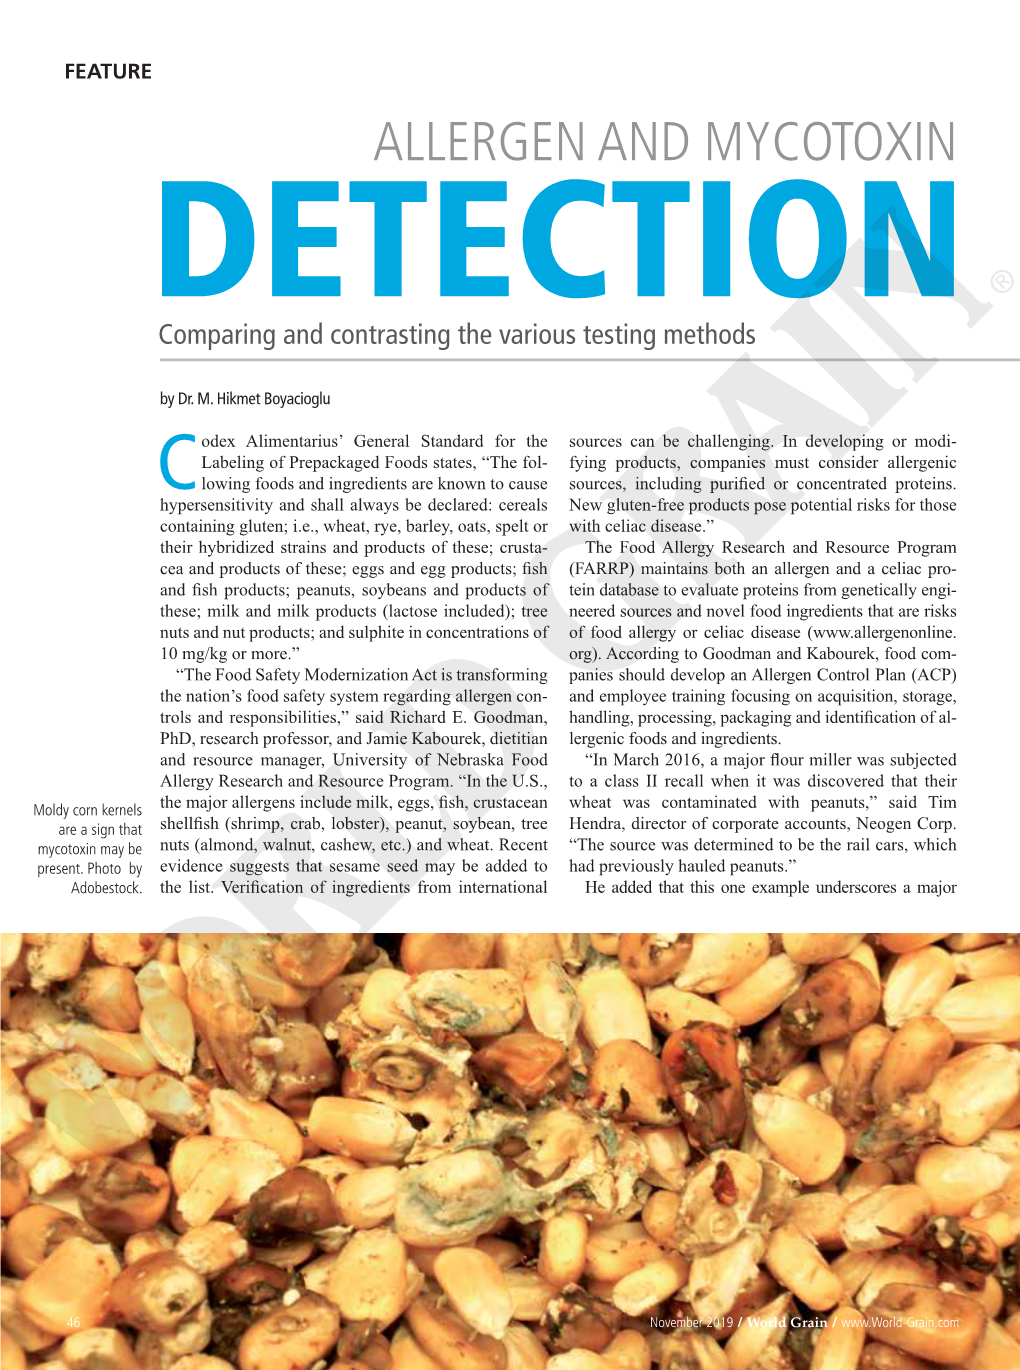 ALLERGEN and MYCOTOXIN DETECTION Comparing and Contrasting the Various Testing Methods